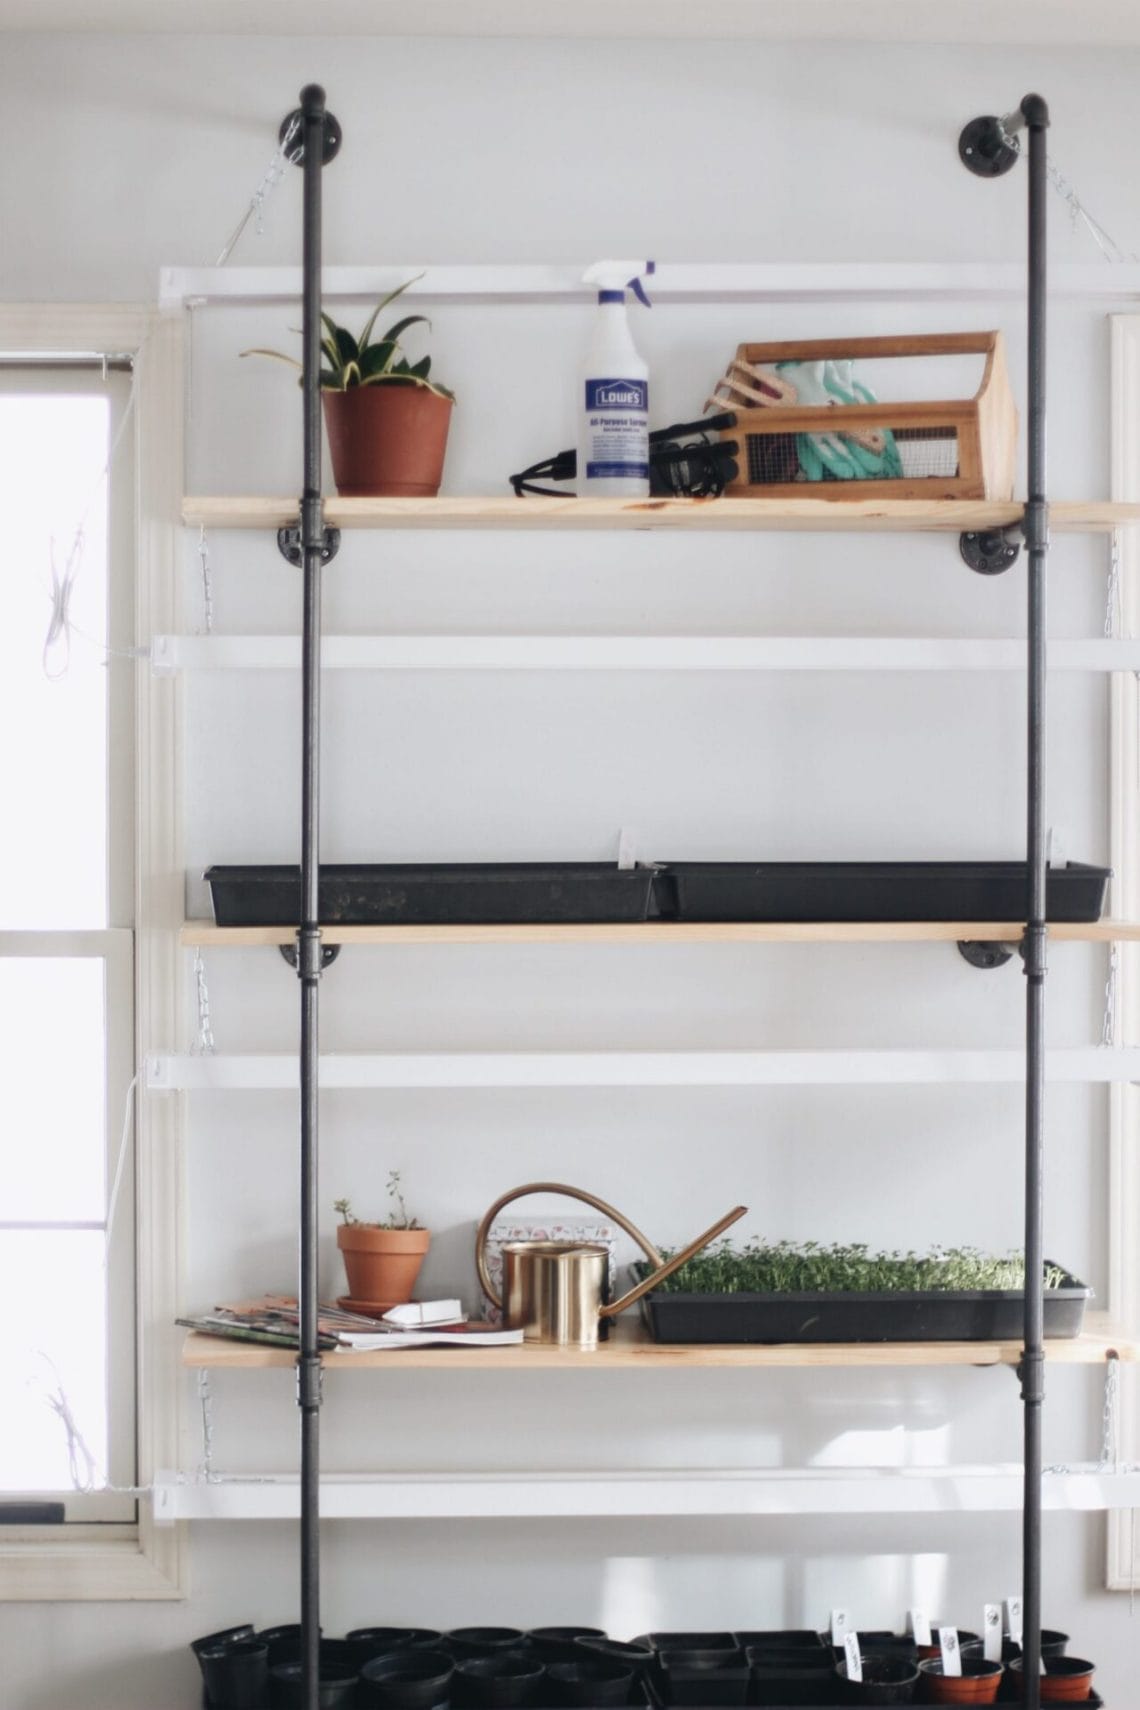 From Chaos to Order: 15 Brilliant Tool Storage Ideas - tinktube